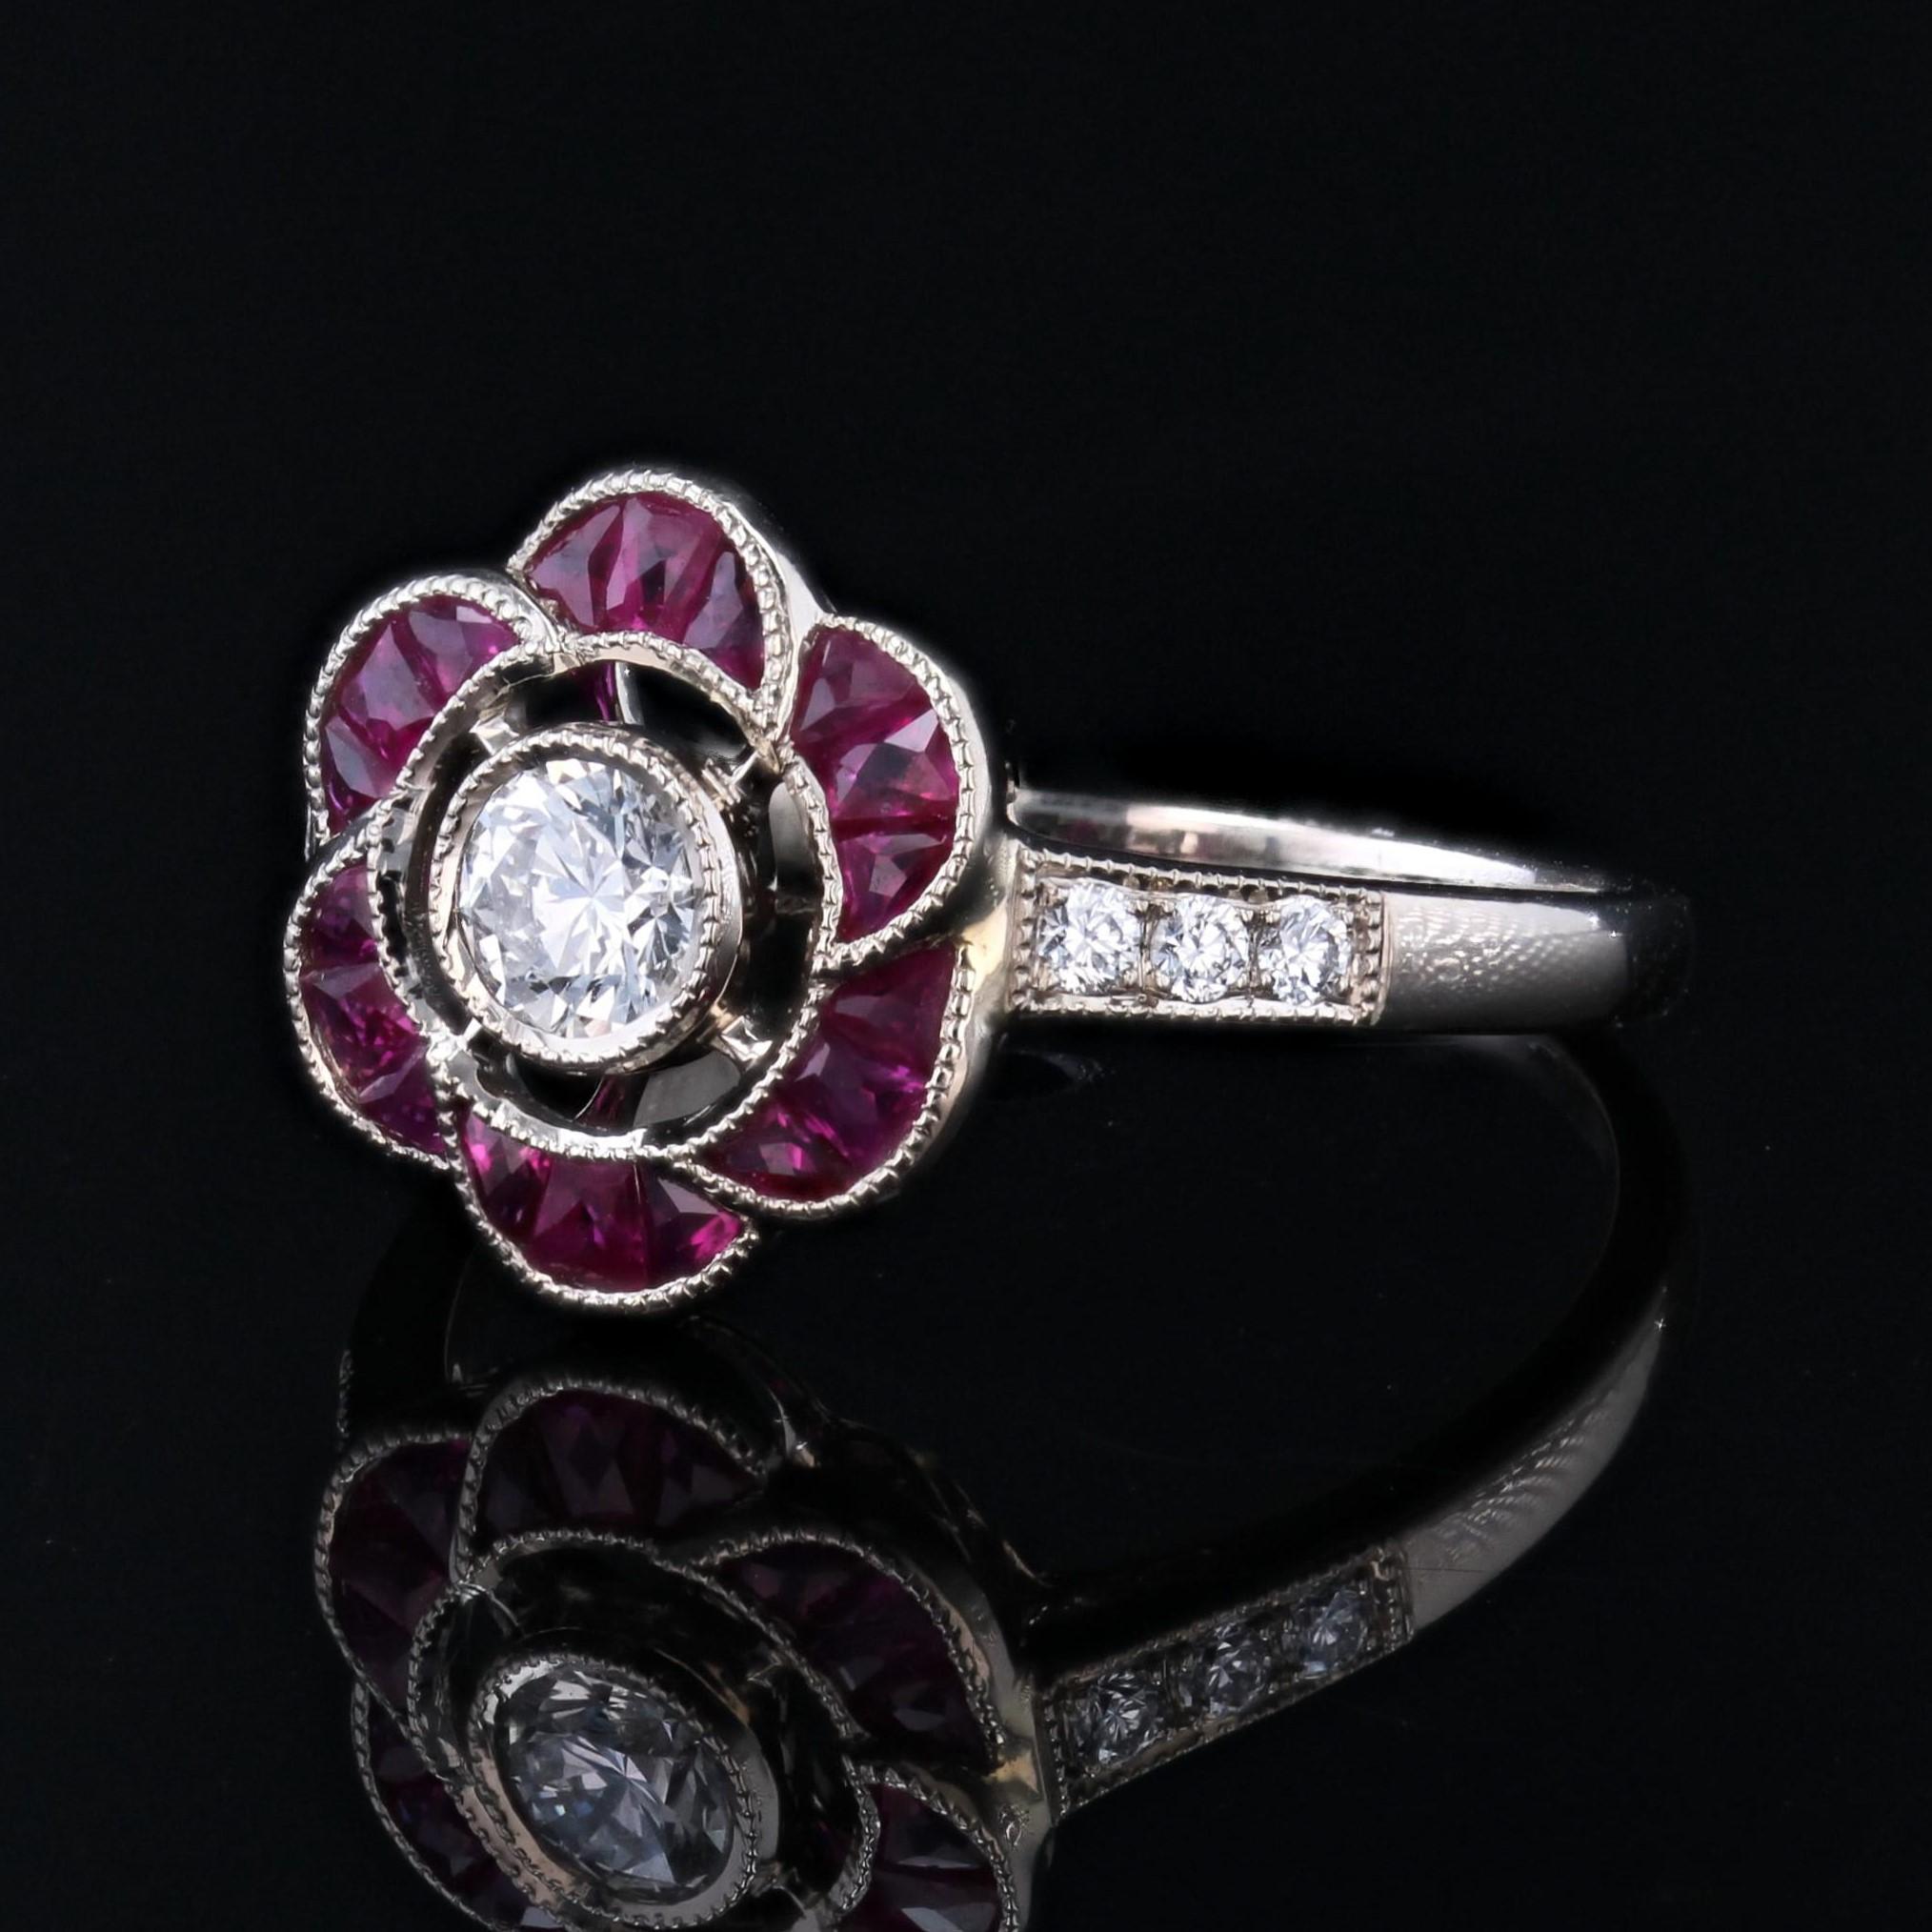 New Art Deco Style Calibrated Rubies Diamonds 18 Karat White Gold Flower Ring For Sale 2